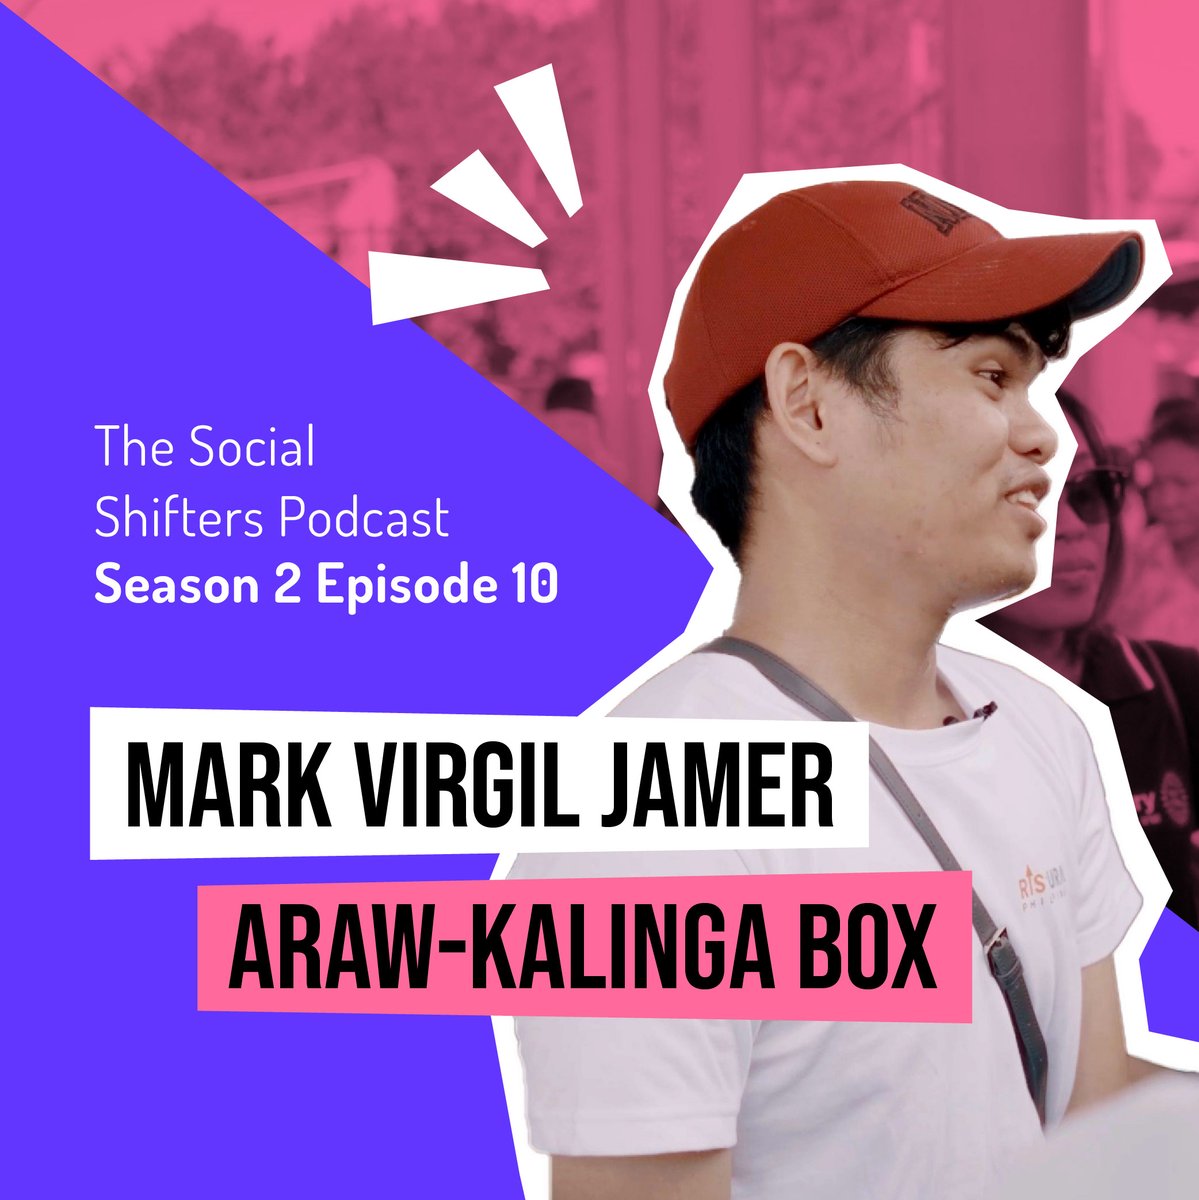 ☀️Healthcare powered by sunshine! 🇵🇭 The Araw-Kalinga Box brings life-saving tech to remote communities in the Philippines. Listen to our podcast with the founder & discover how YOU can help! Watch in full: youtu.be/jjo7pff6aak